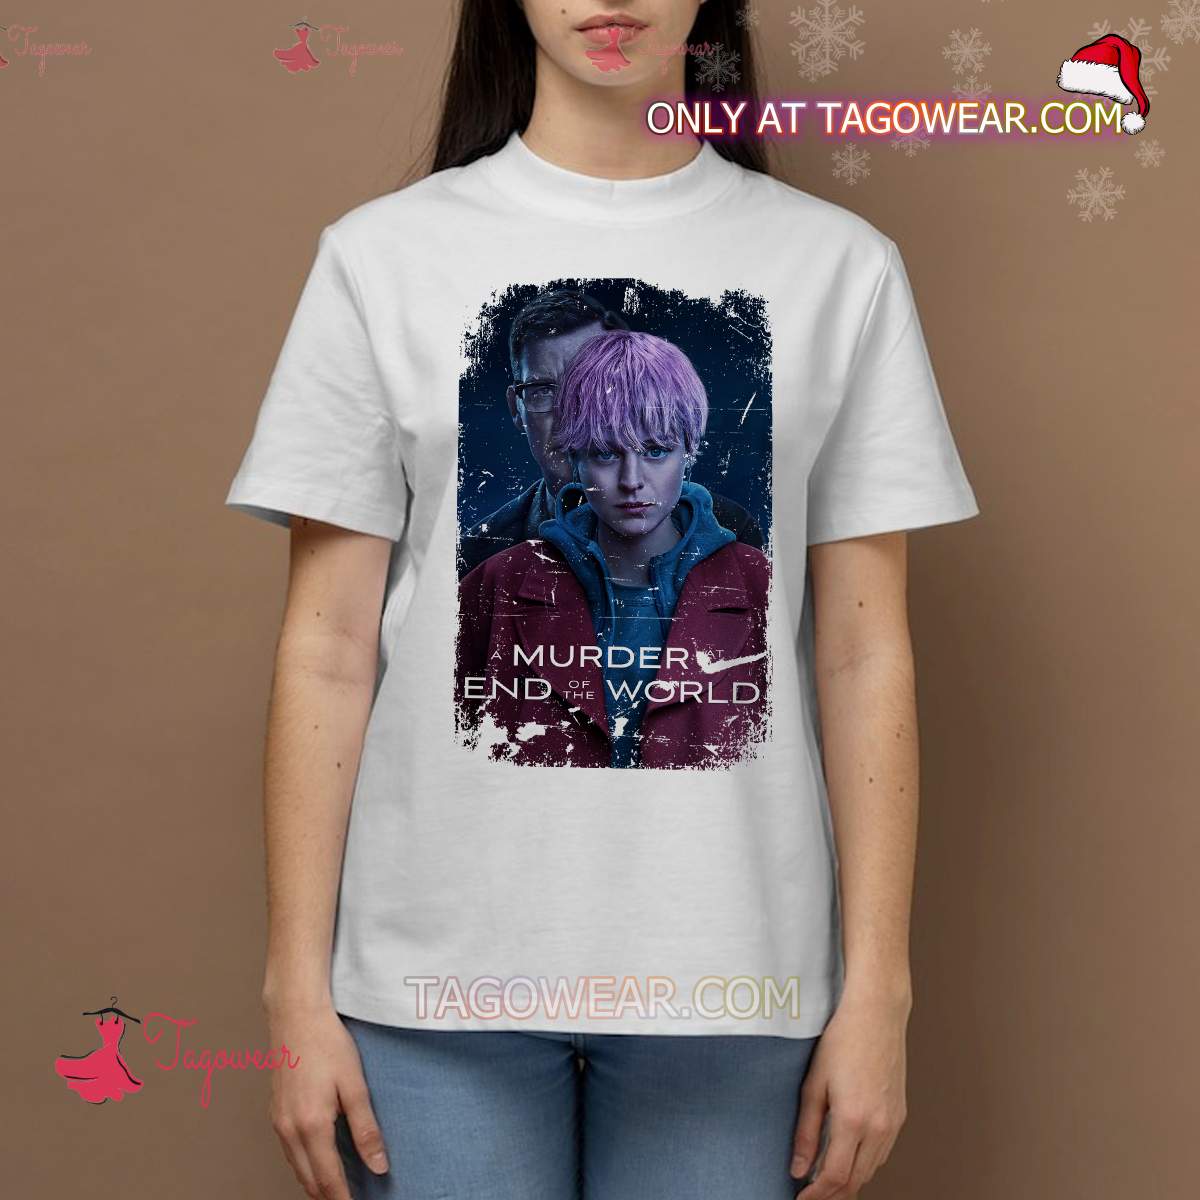 A Murder at the End of the World Shirt a